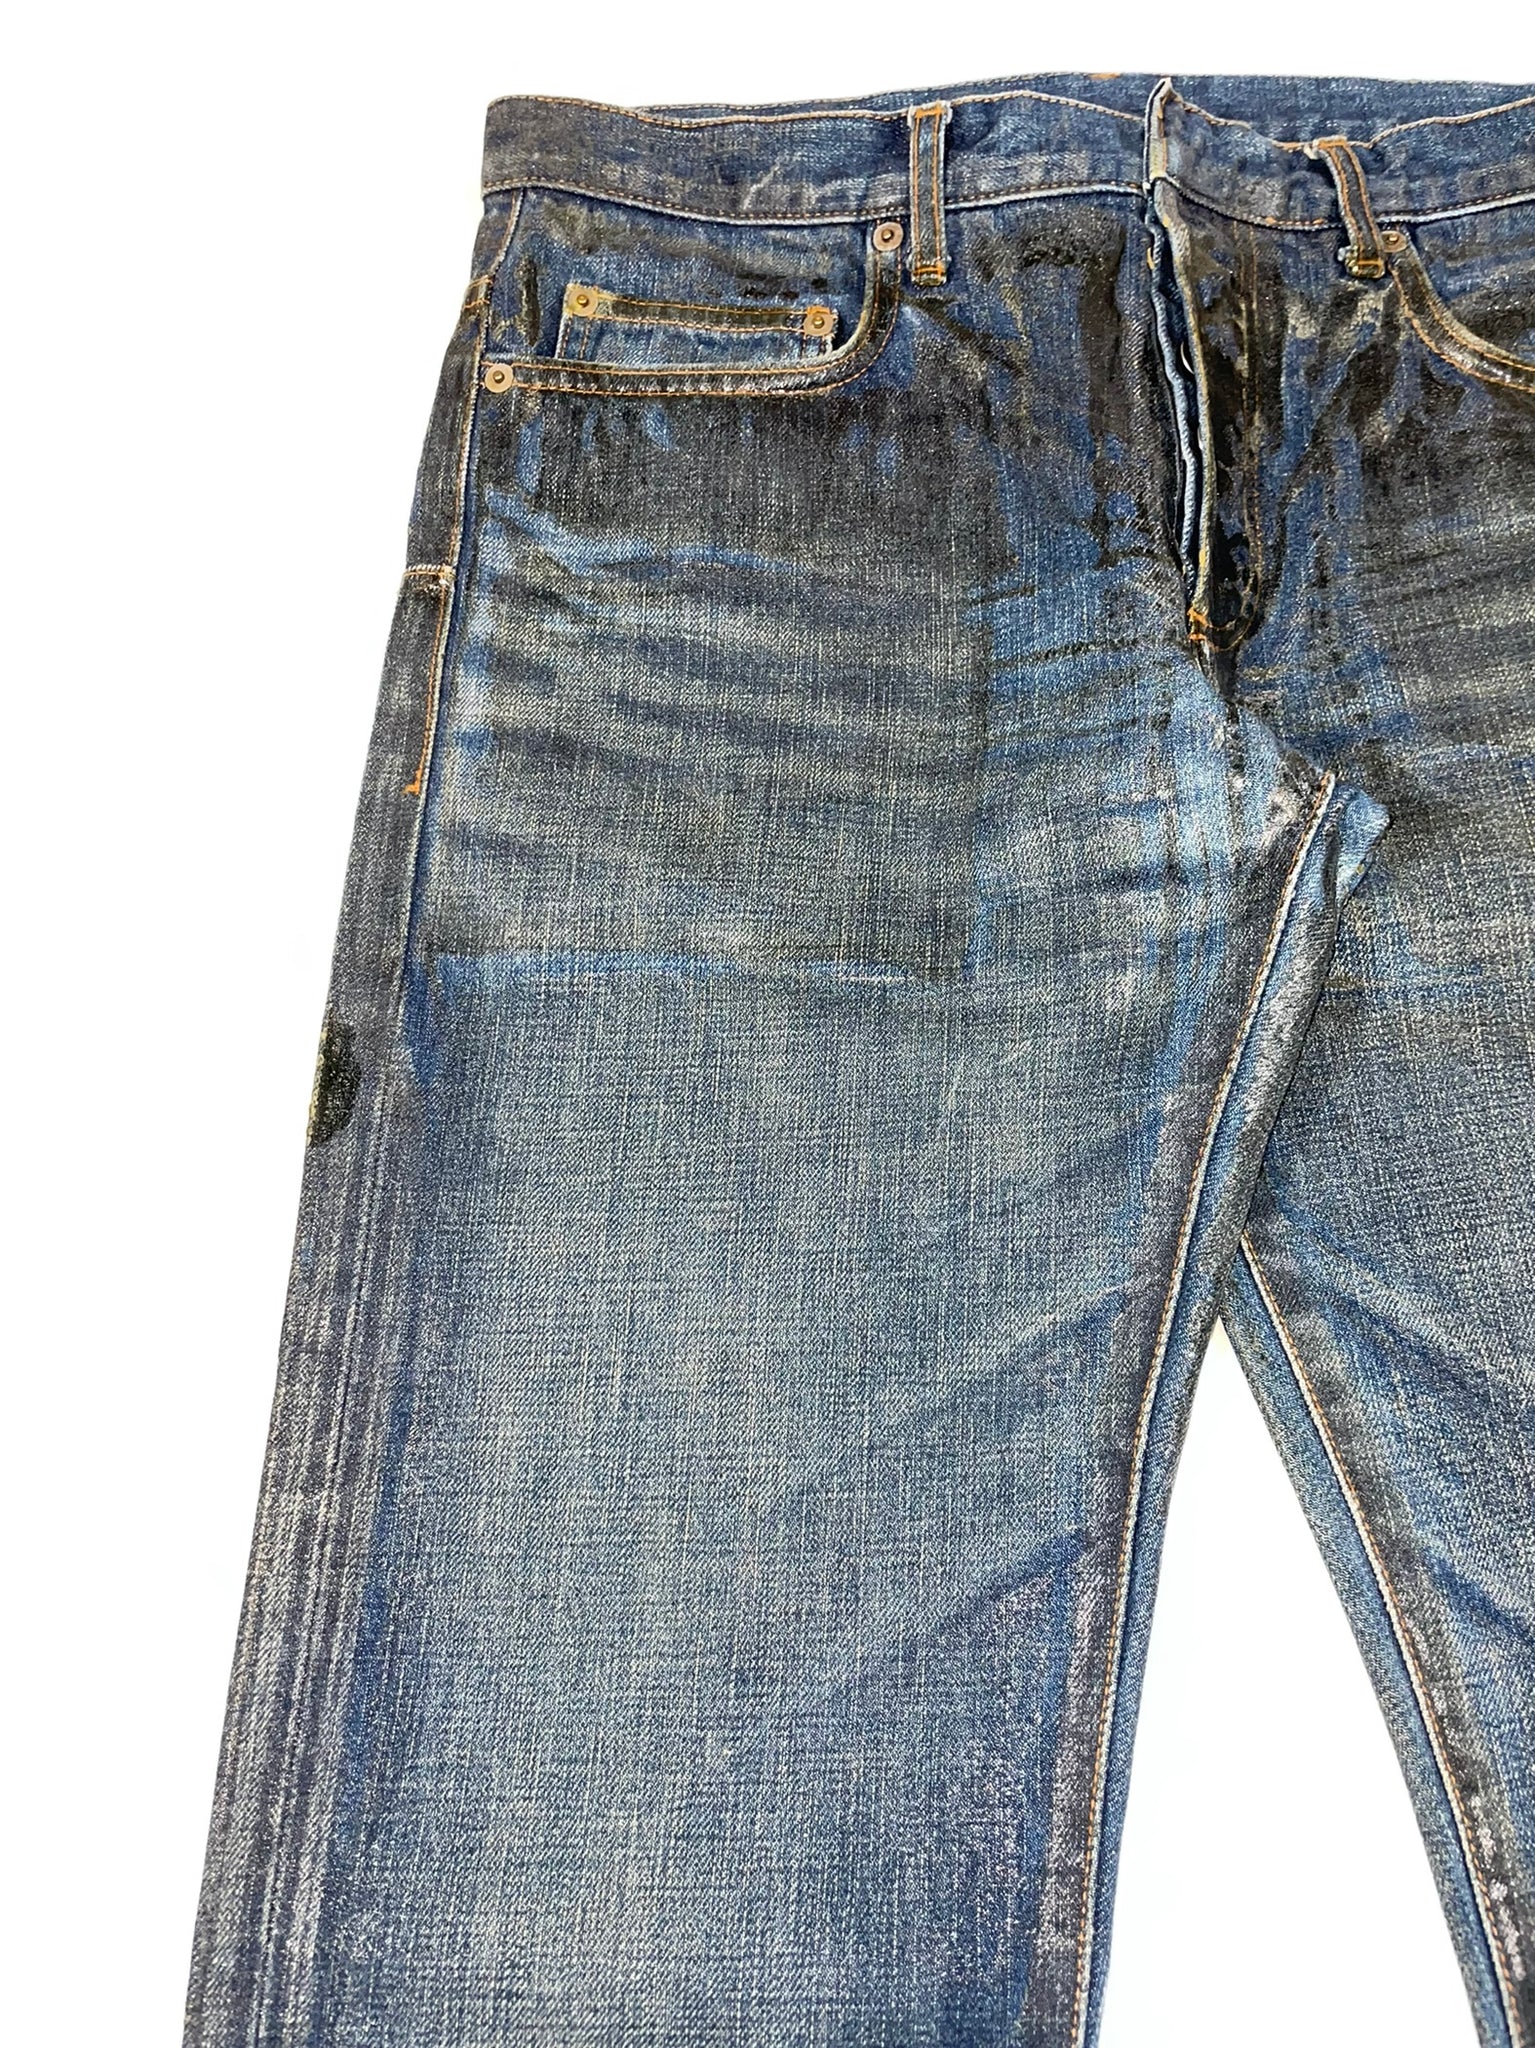 G-Star Raw Wax Coated Jeans, Men's Fashion, Bottoms, Jeans on Carousell